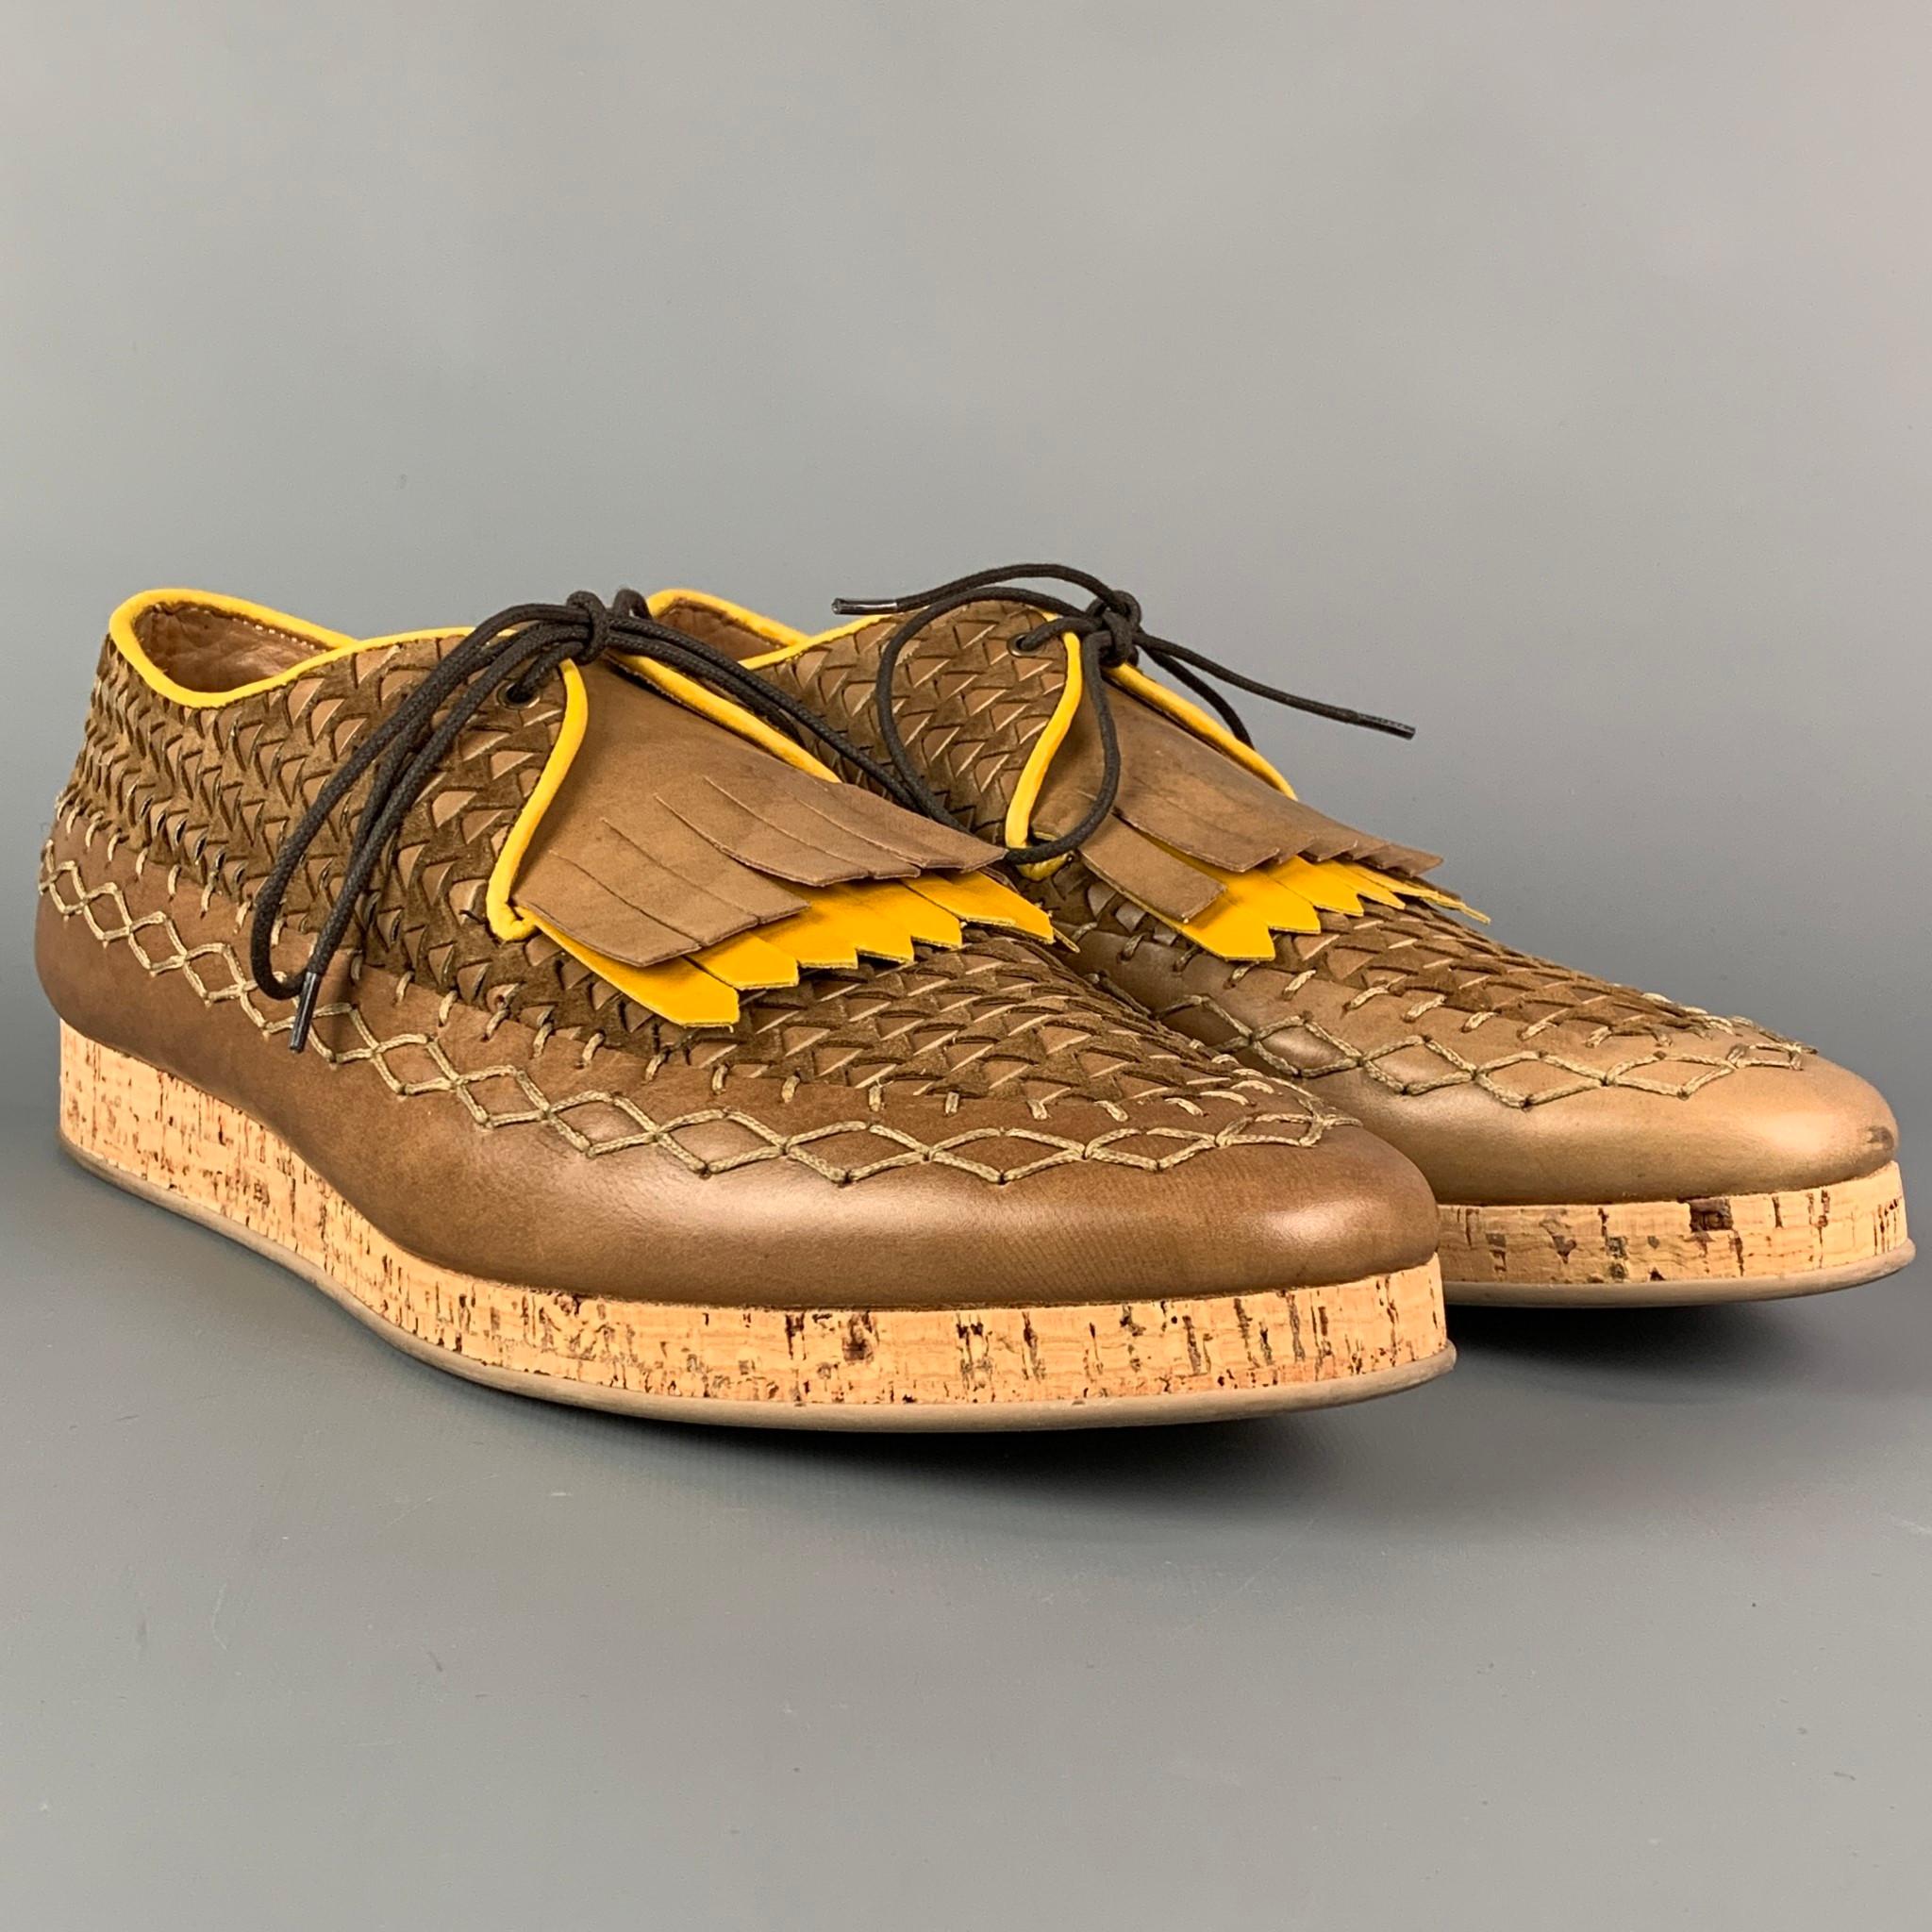 BURBERRY PRORSUM 'Arundel Mocassin' shoes comes in a brown leather with a yellow trim featuring stitched details, lace up, and a cork sole. Made in Italy. Includes box. 

Excellent Pre-Owned Condition.
Marked: 45
Original Retail Price: